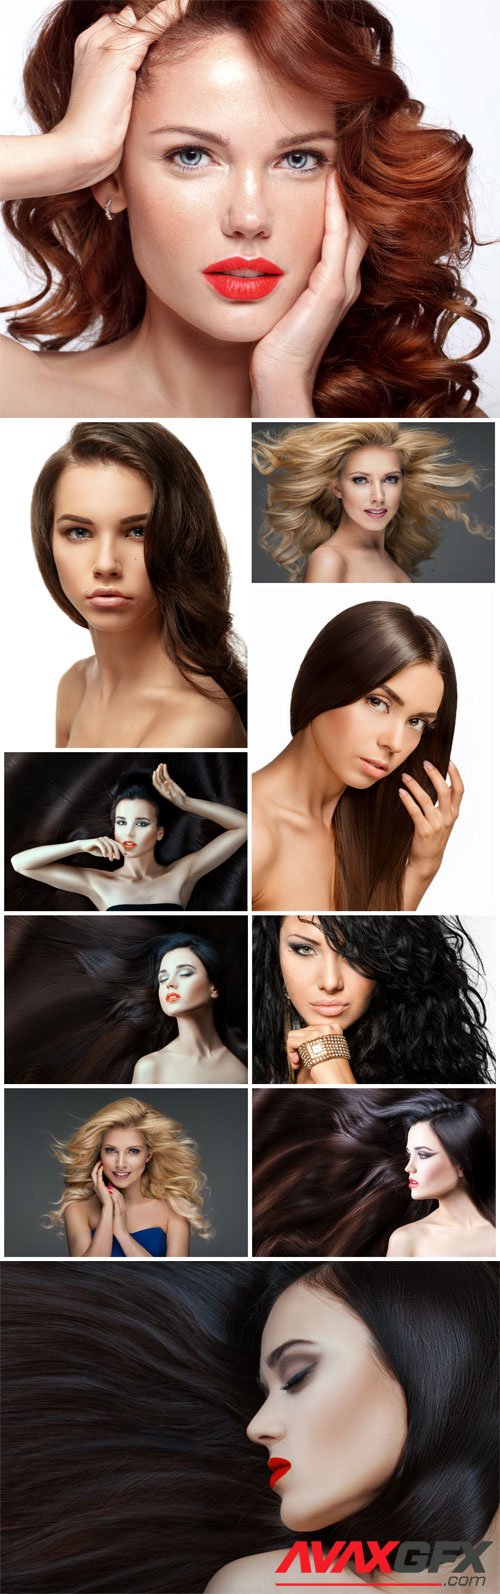 Stylish young girls with different hairstyles stock photo